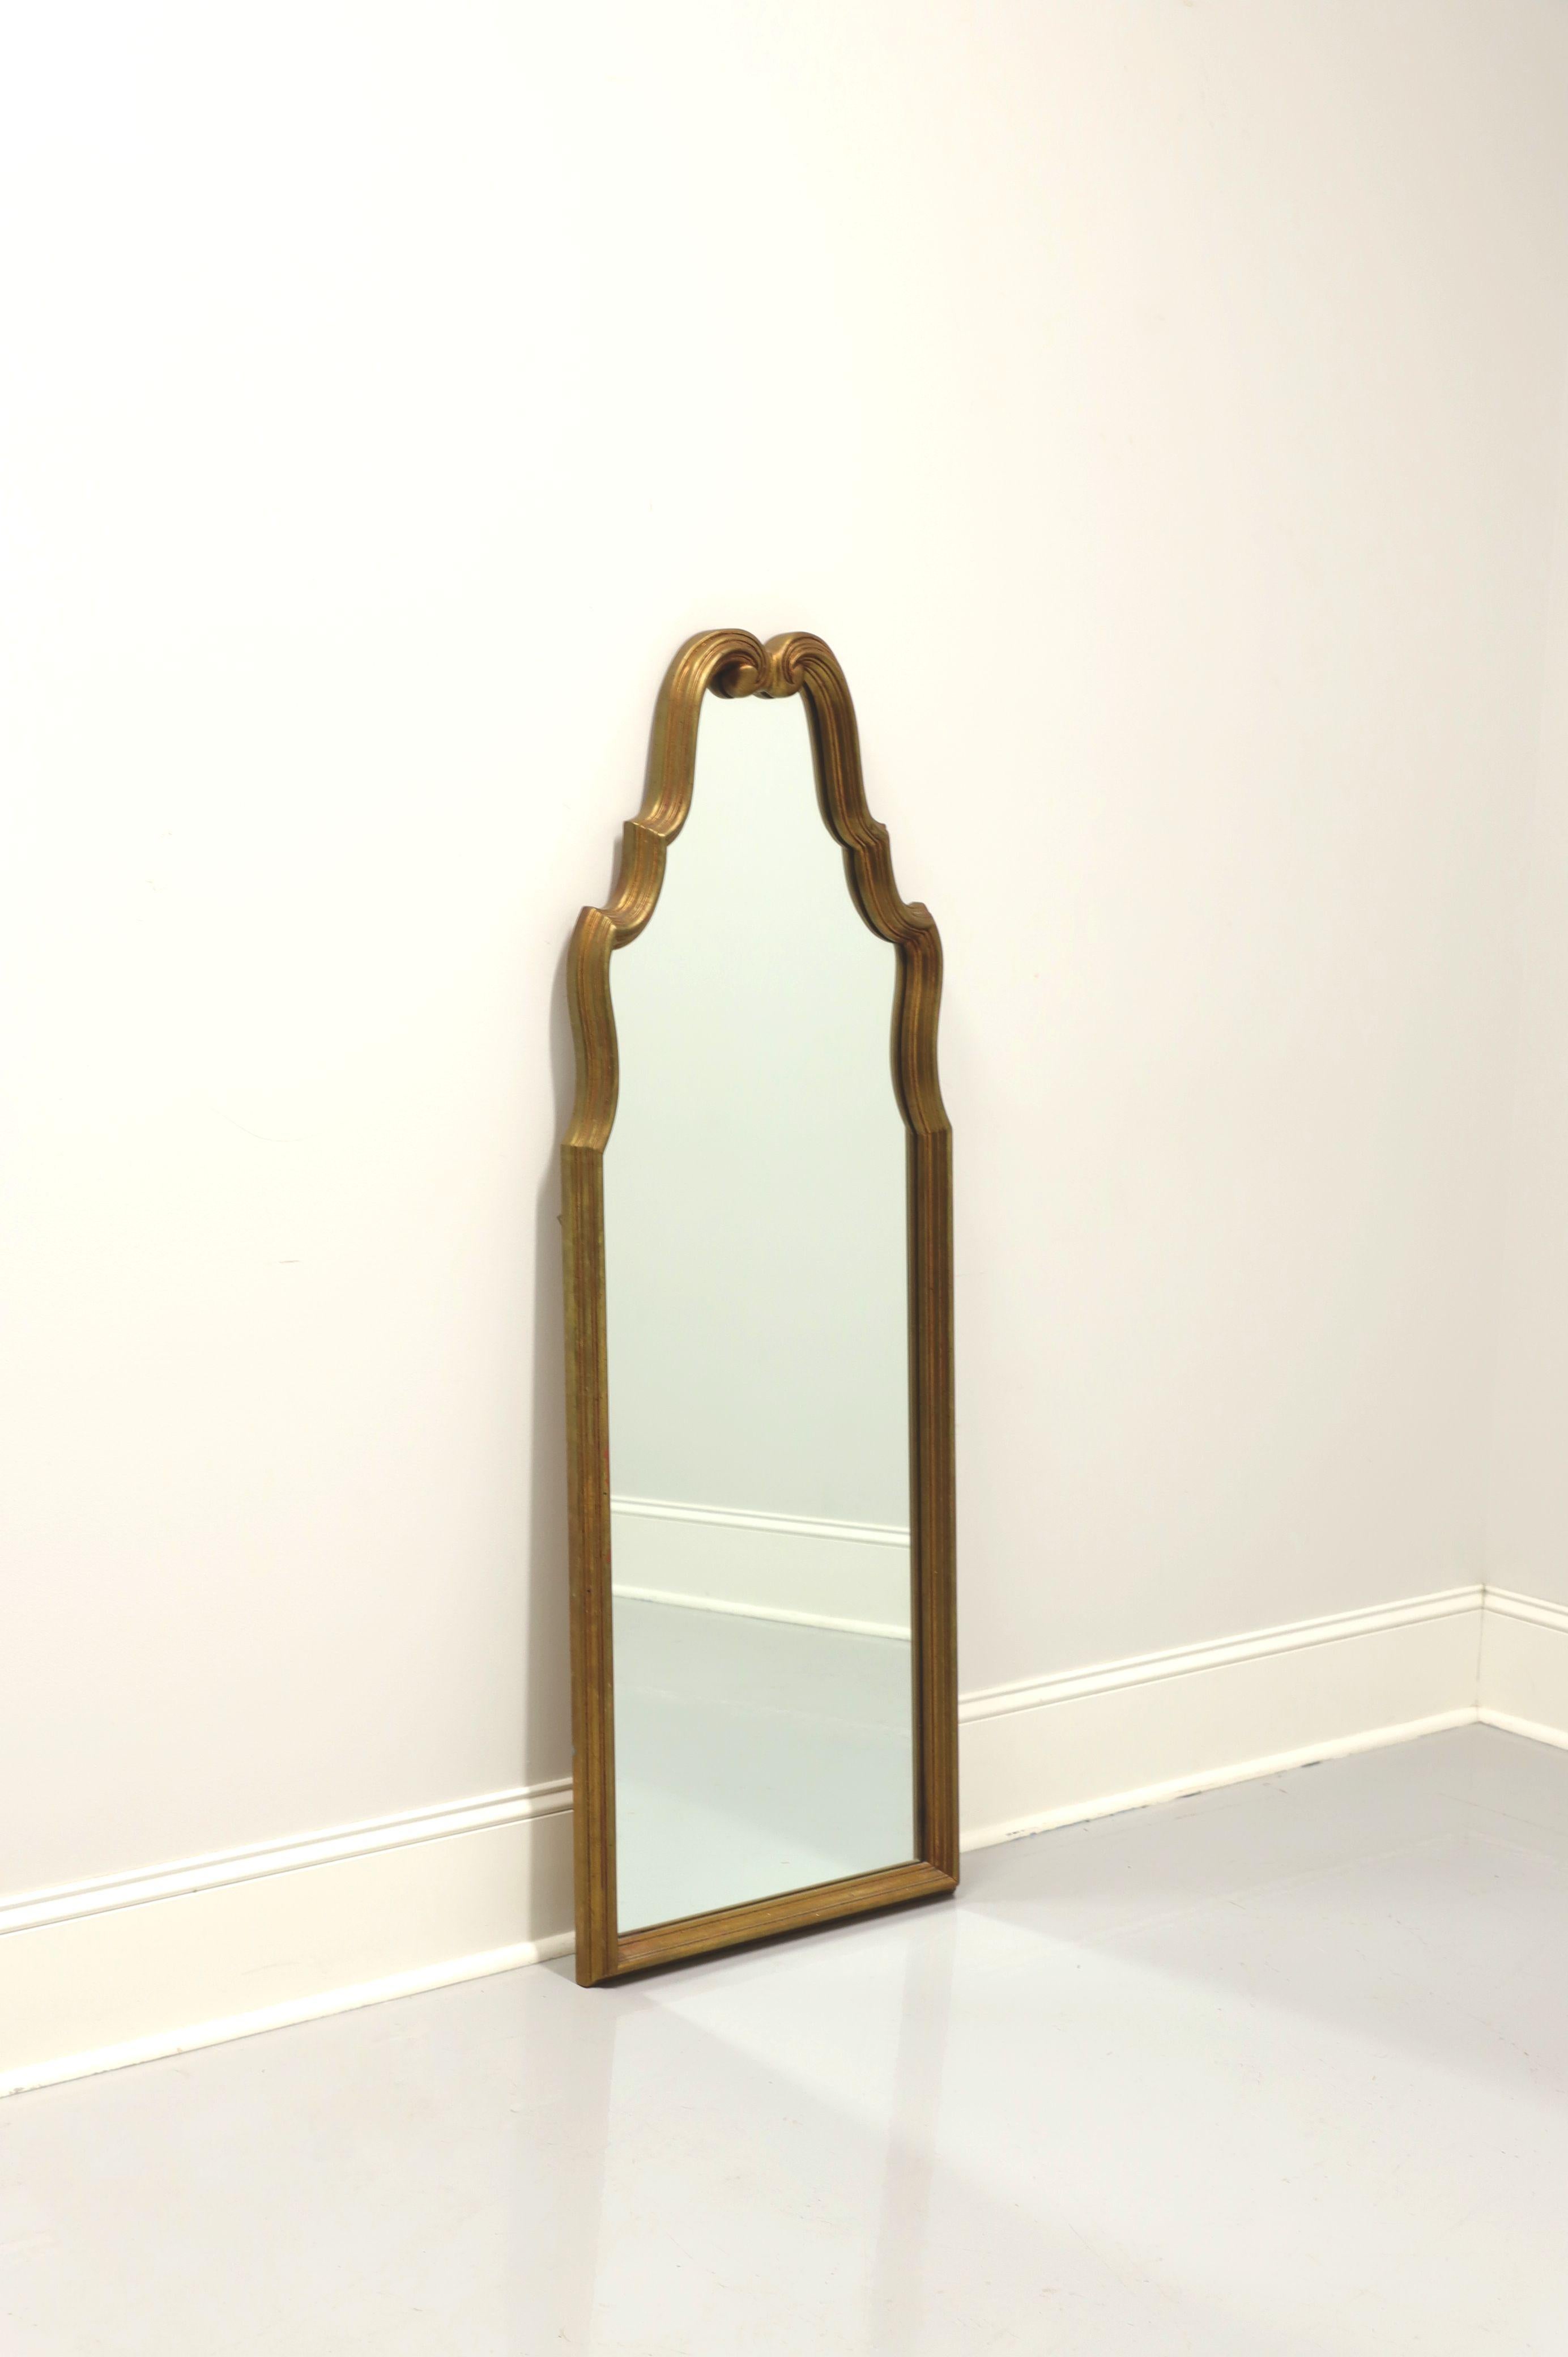 A French Rococo style wall mirror, unbranded. Mirror glass and gold painted wood frame with decoratively carved top and slender profile. Made in the USA, in the mid-20th Century.

Measures: 20.5 W 2 D 56.5 H, Weighs Approximately: 30